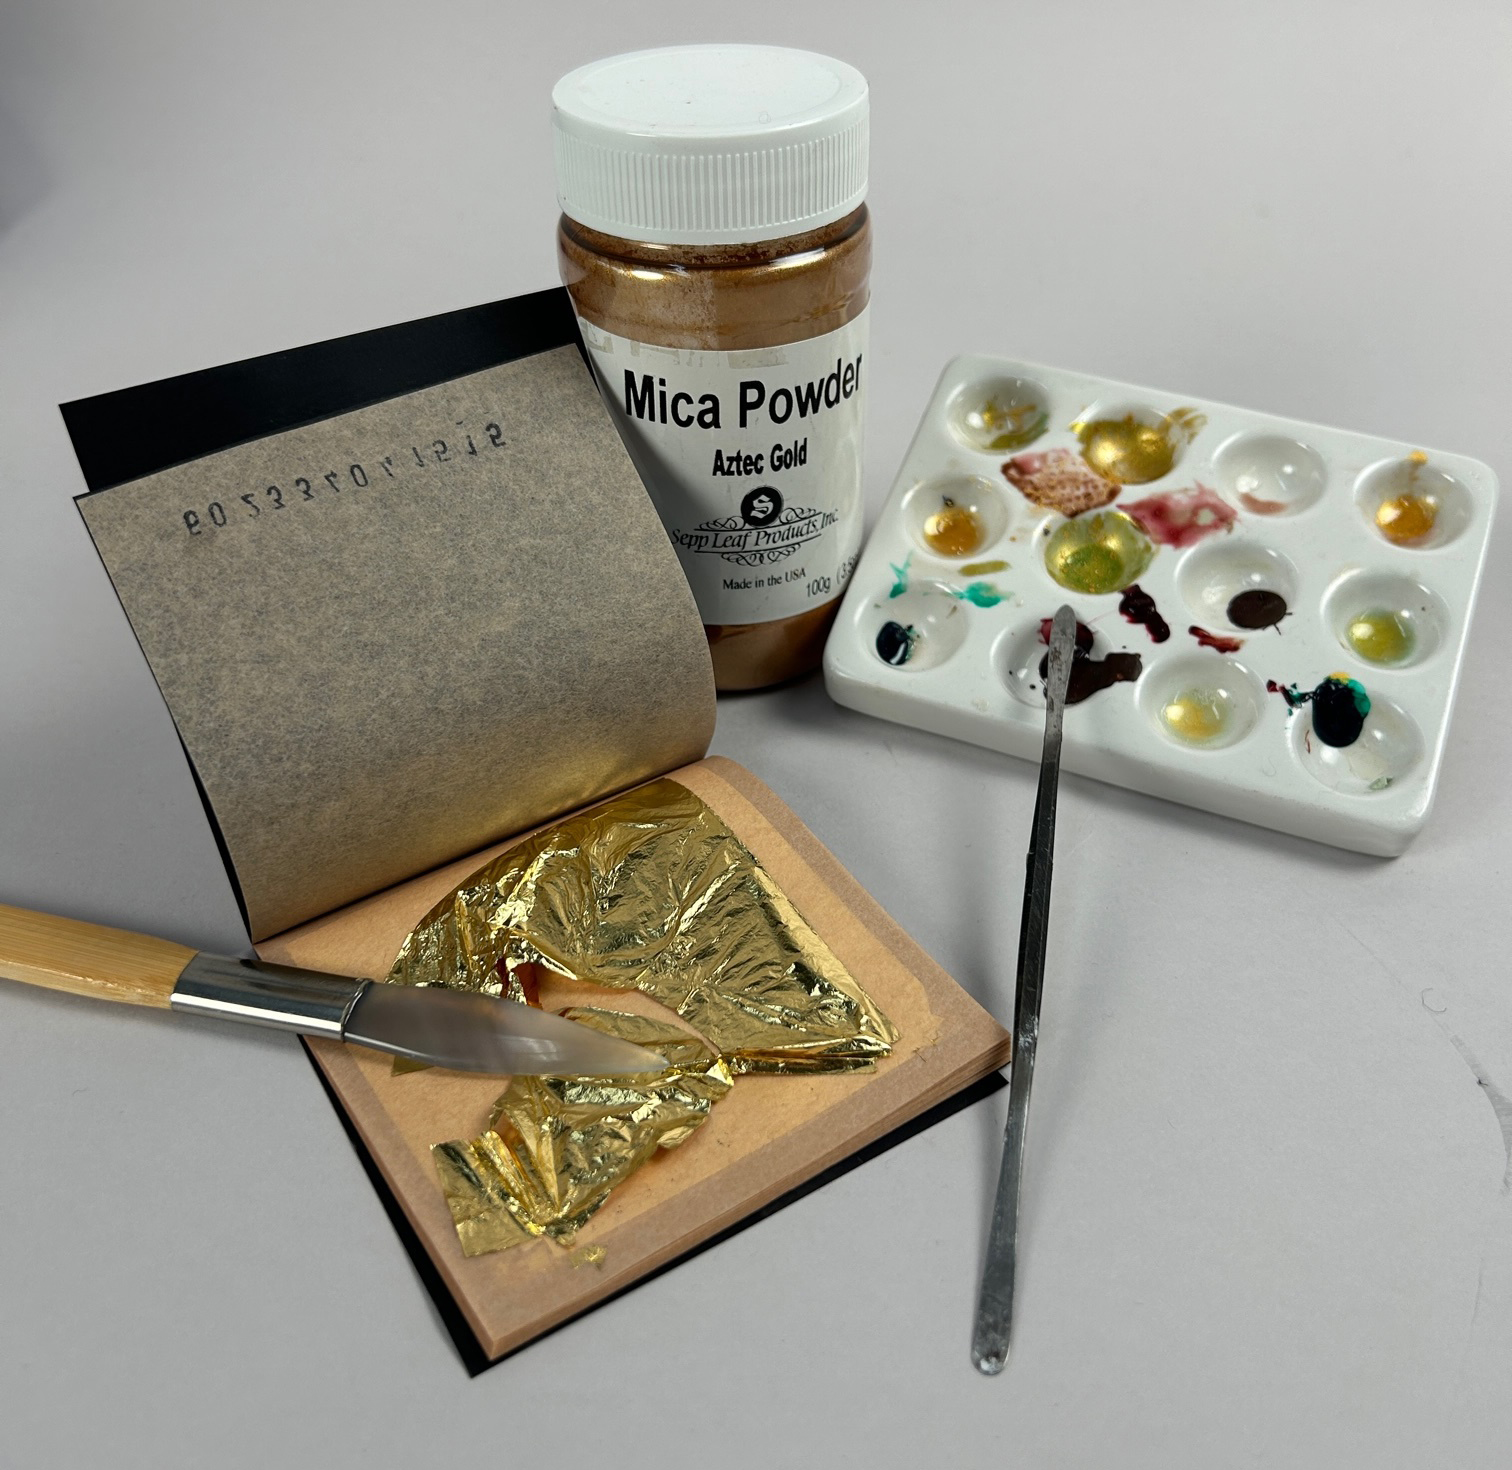 On a blank surface is a pad on white rests gold leaf, a jar containing a gold substance and displaying the words “Mica Powder / Aztec Gold”, a paint palette with samples of a variety of gold and black hues, and two spindly tools.